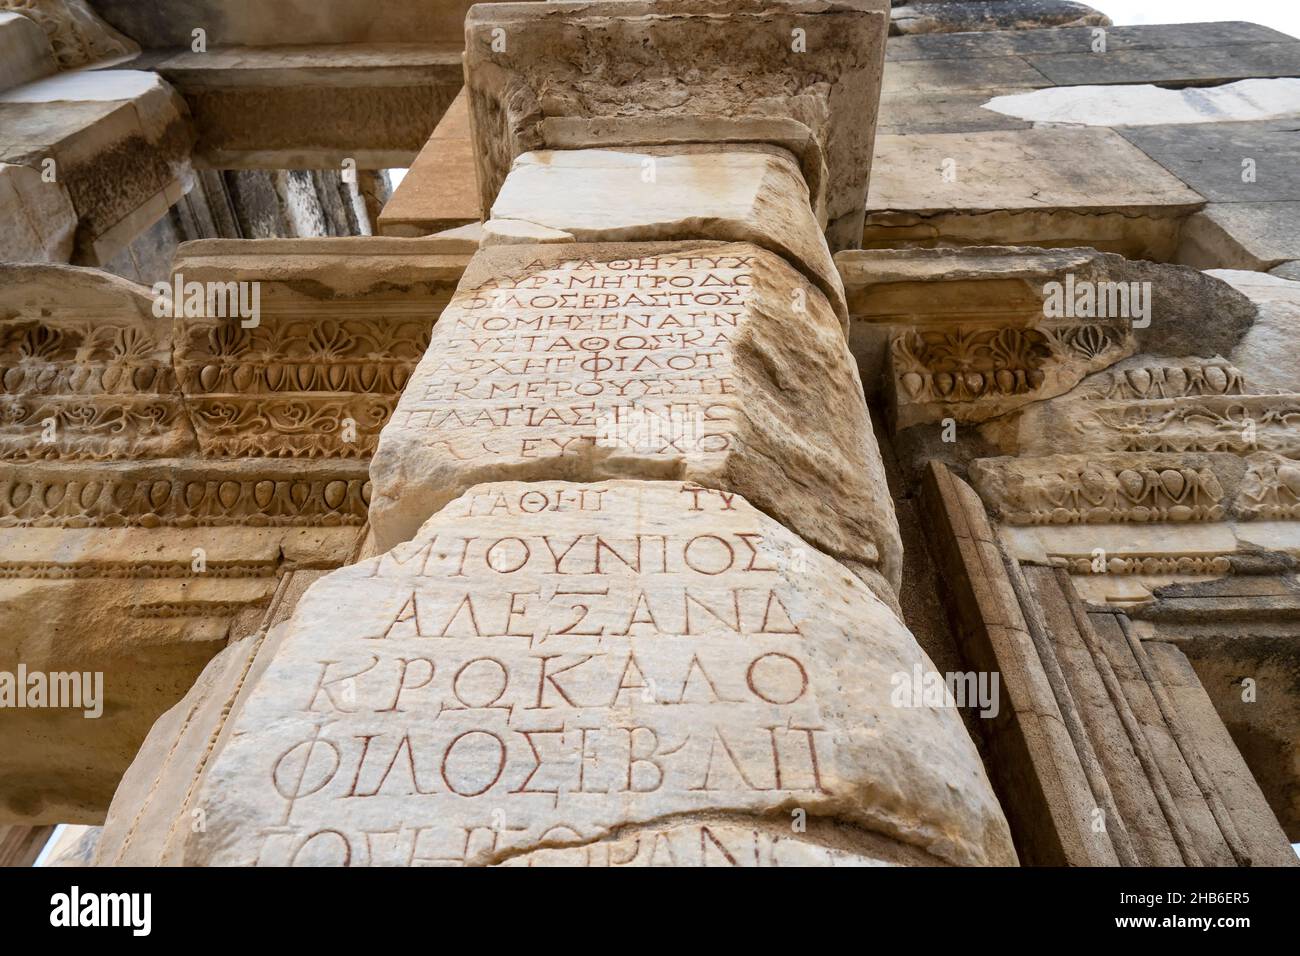 Ancient Greek inscriptions on the wall of Celsus Library in the Ephesus ancient city. Stock Photo